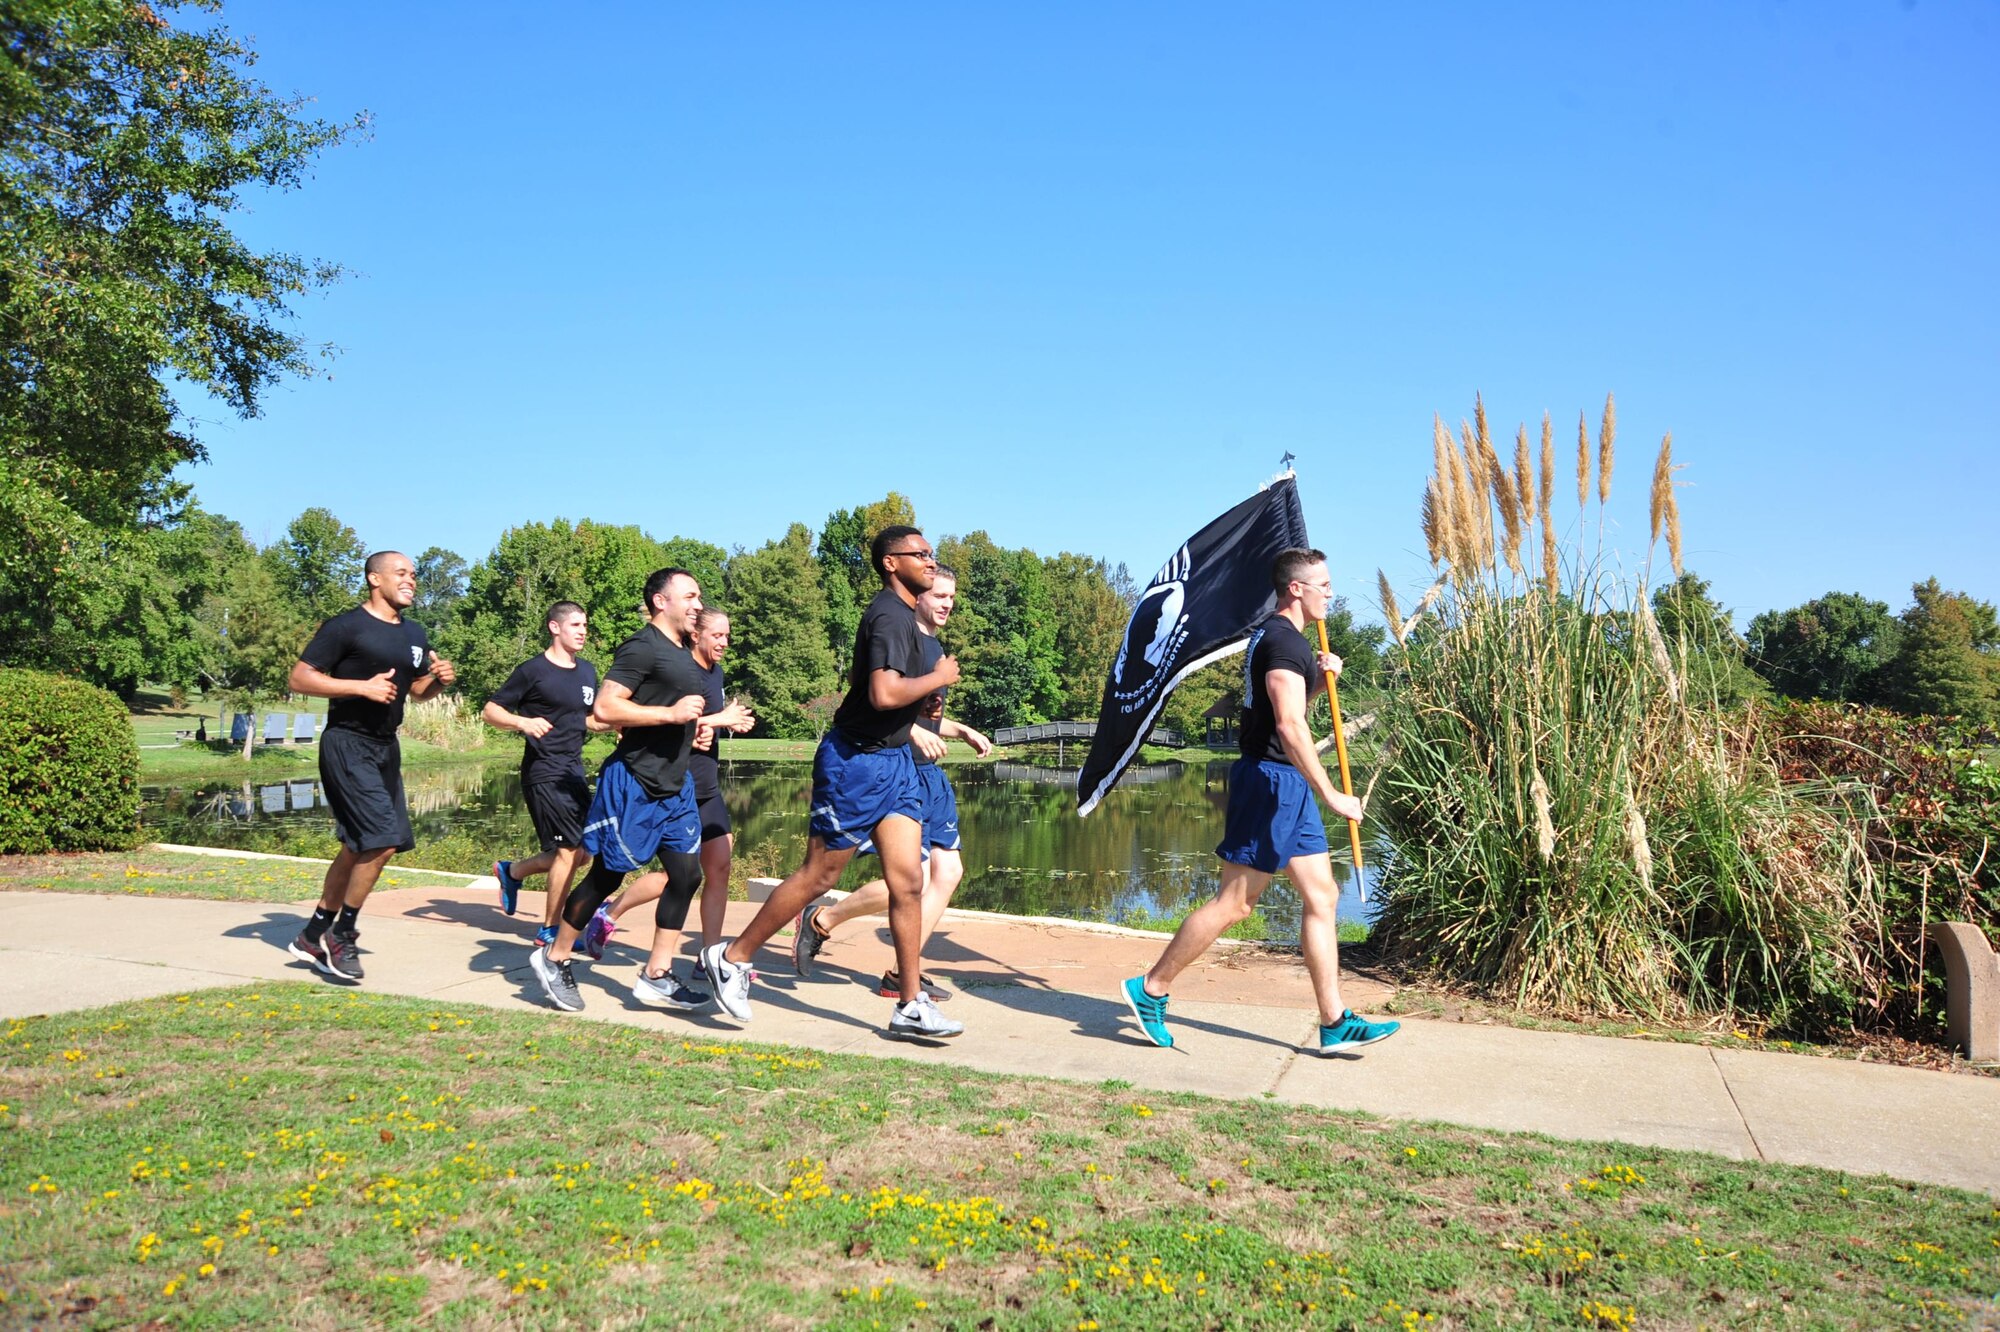 In honor of POW/MIA Recognition Day, Airmen and Soldiers took turns running in teams for 24 hours to symbolize the constant search for all POW/MIA members.